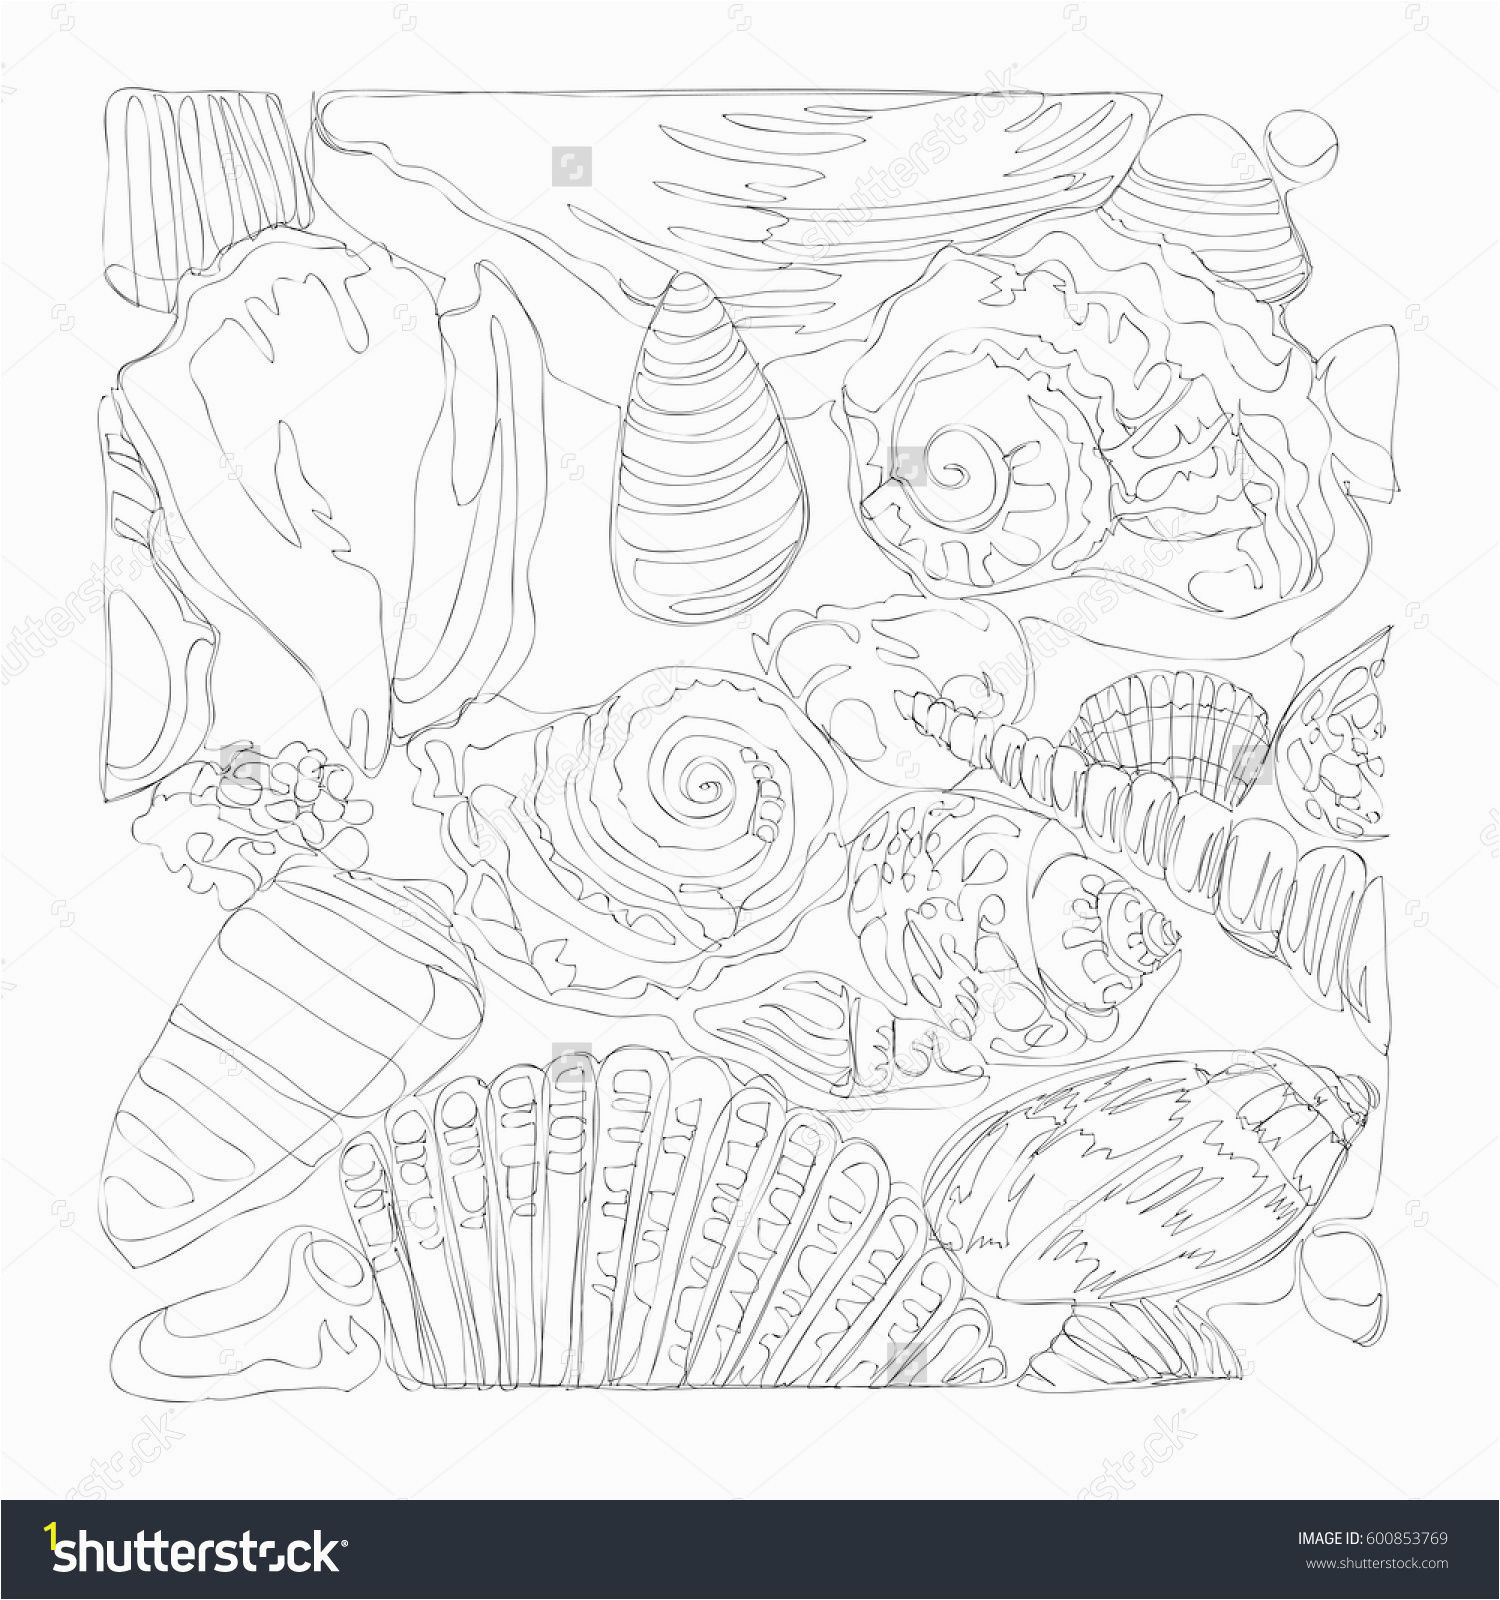 Coloring Pages Of Marines Marine Life Line Art Continuous Line Drawing Coloring Page